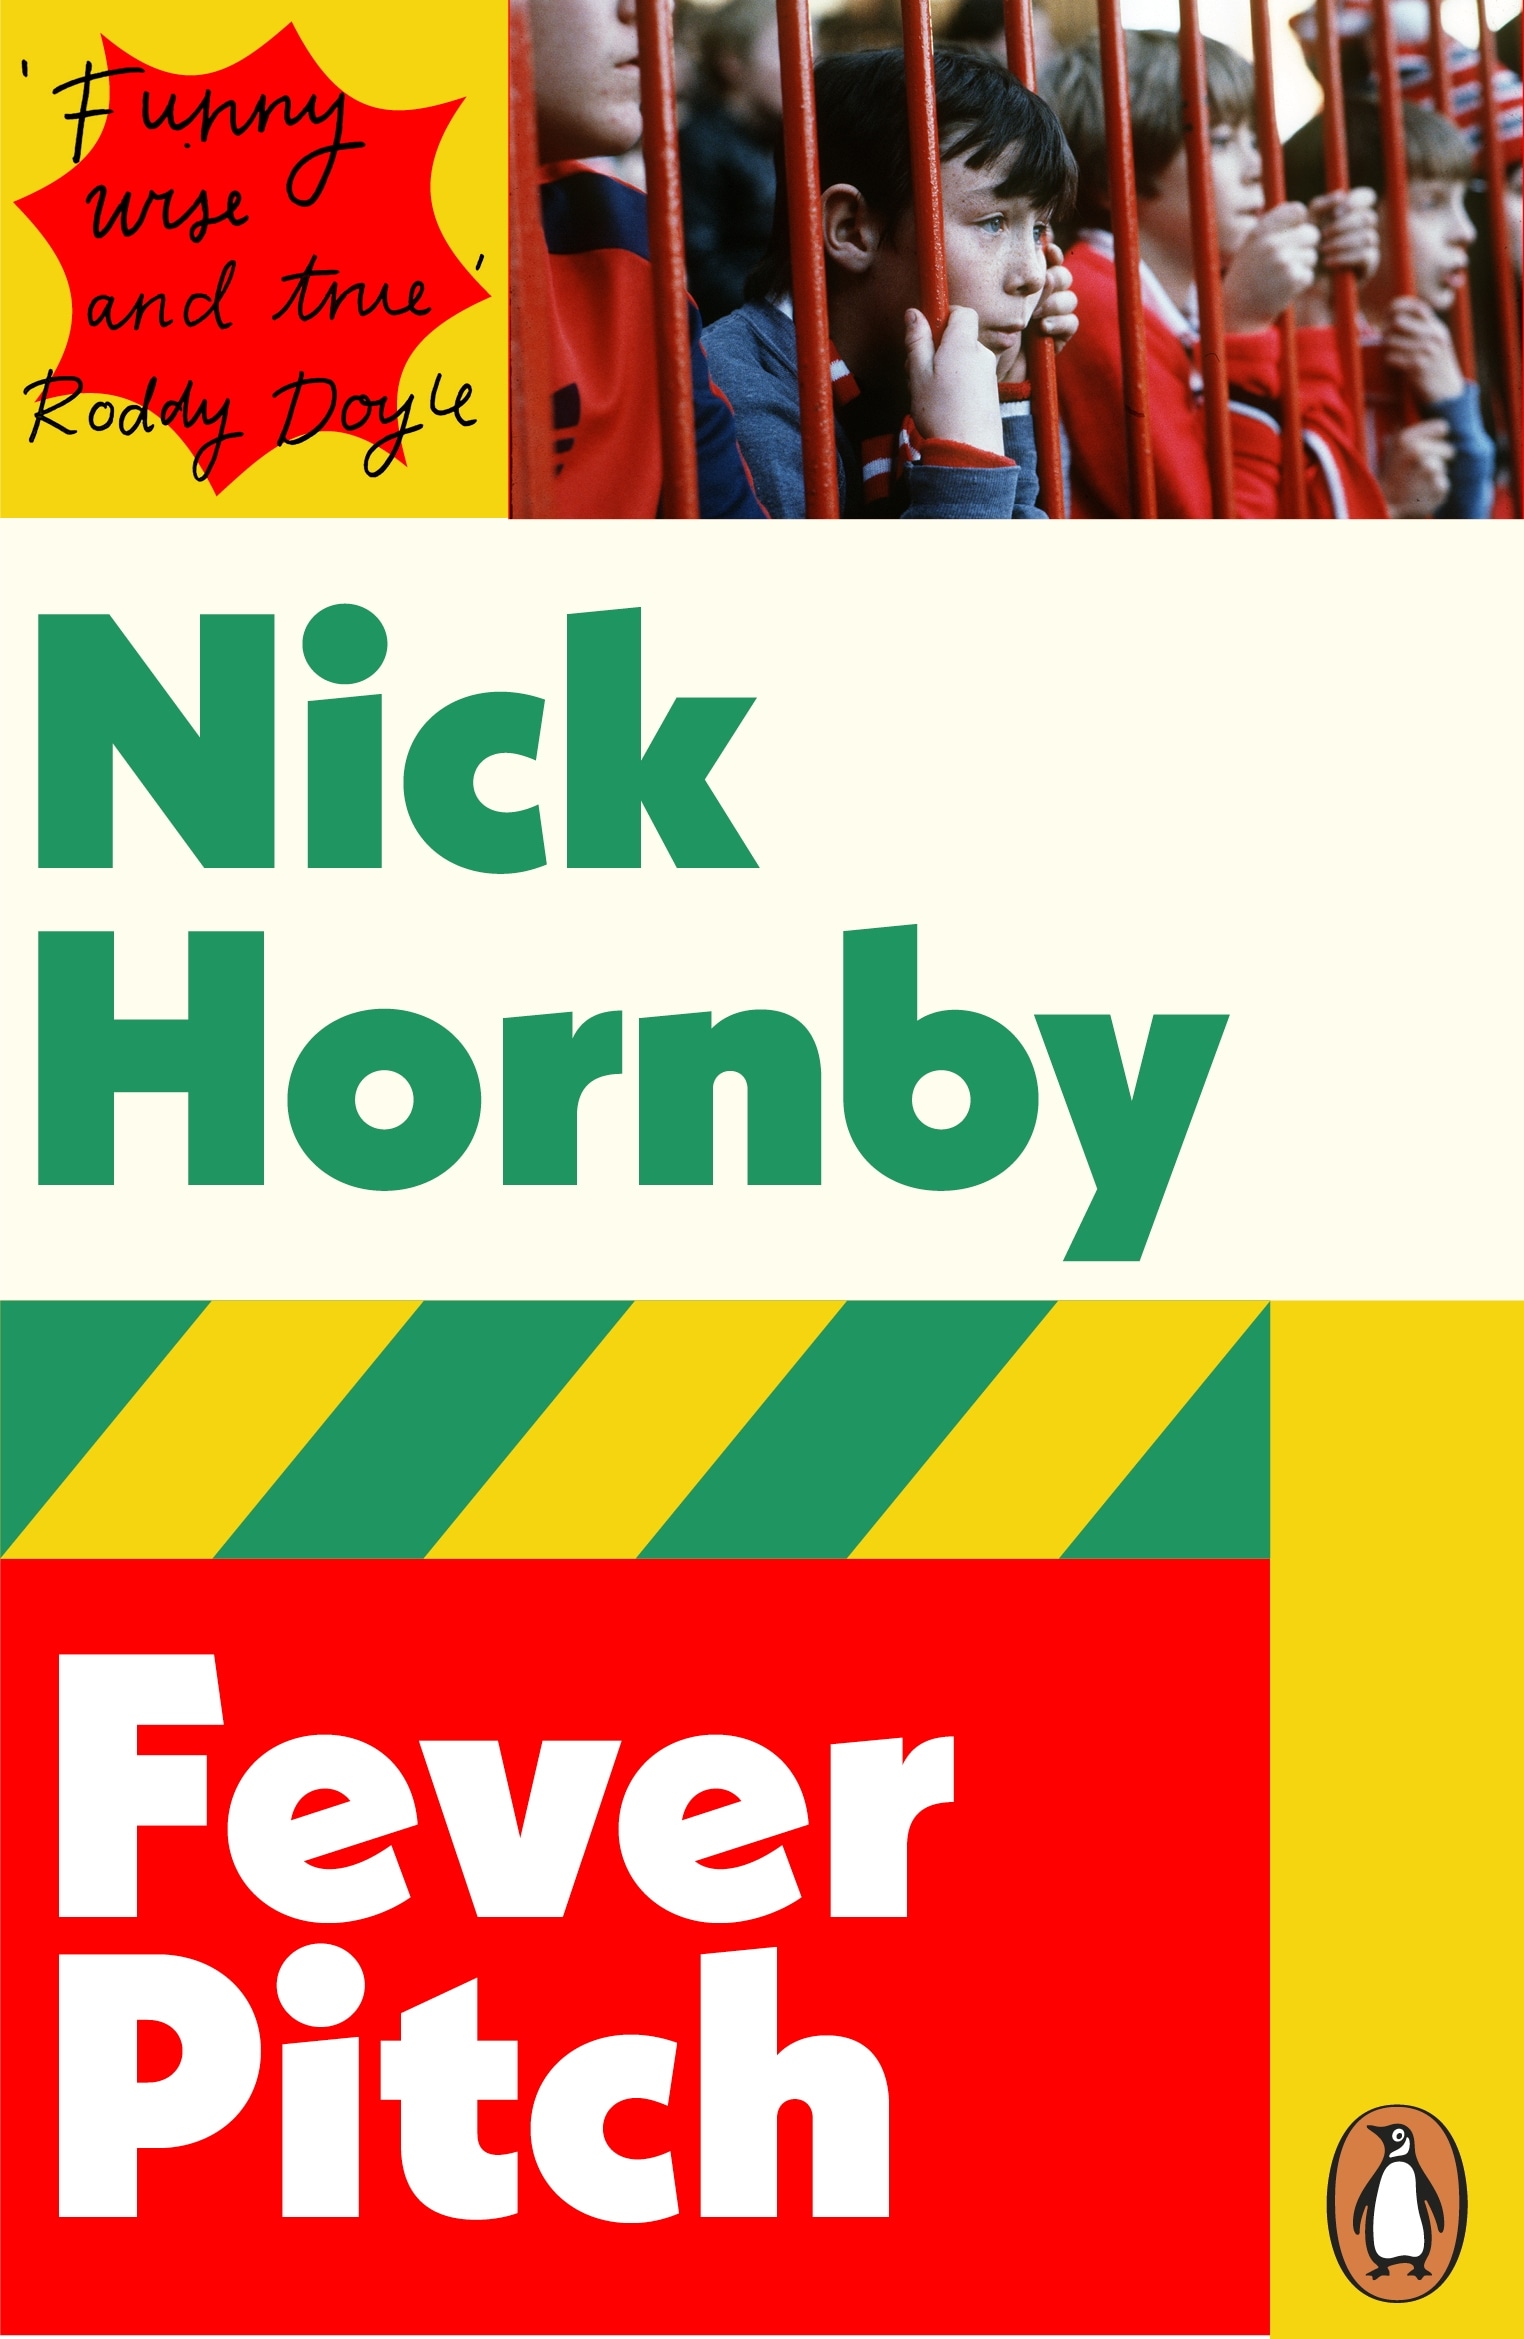 Book “Fever Pitch” by Nick Hornby — January 2, 2014